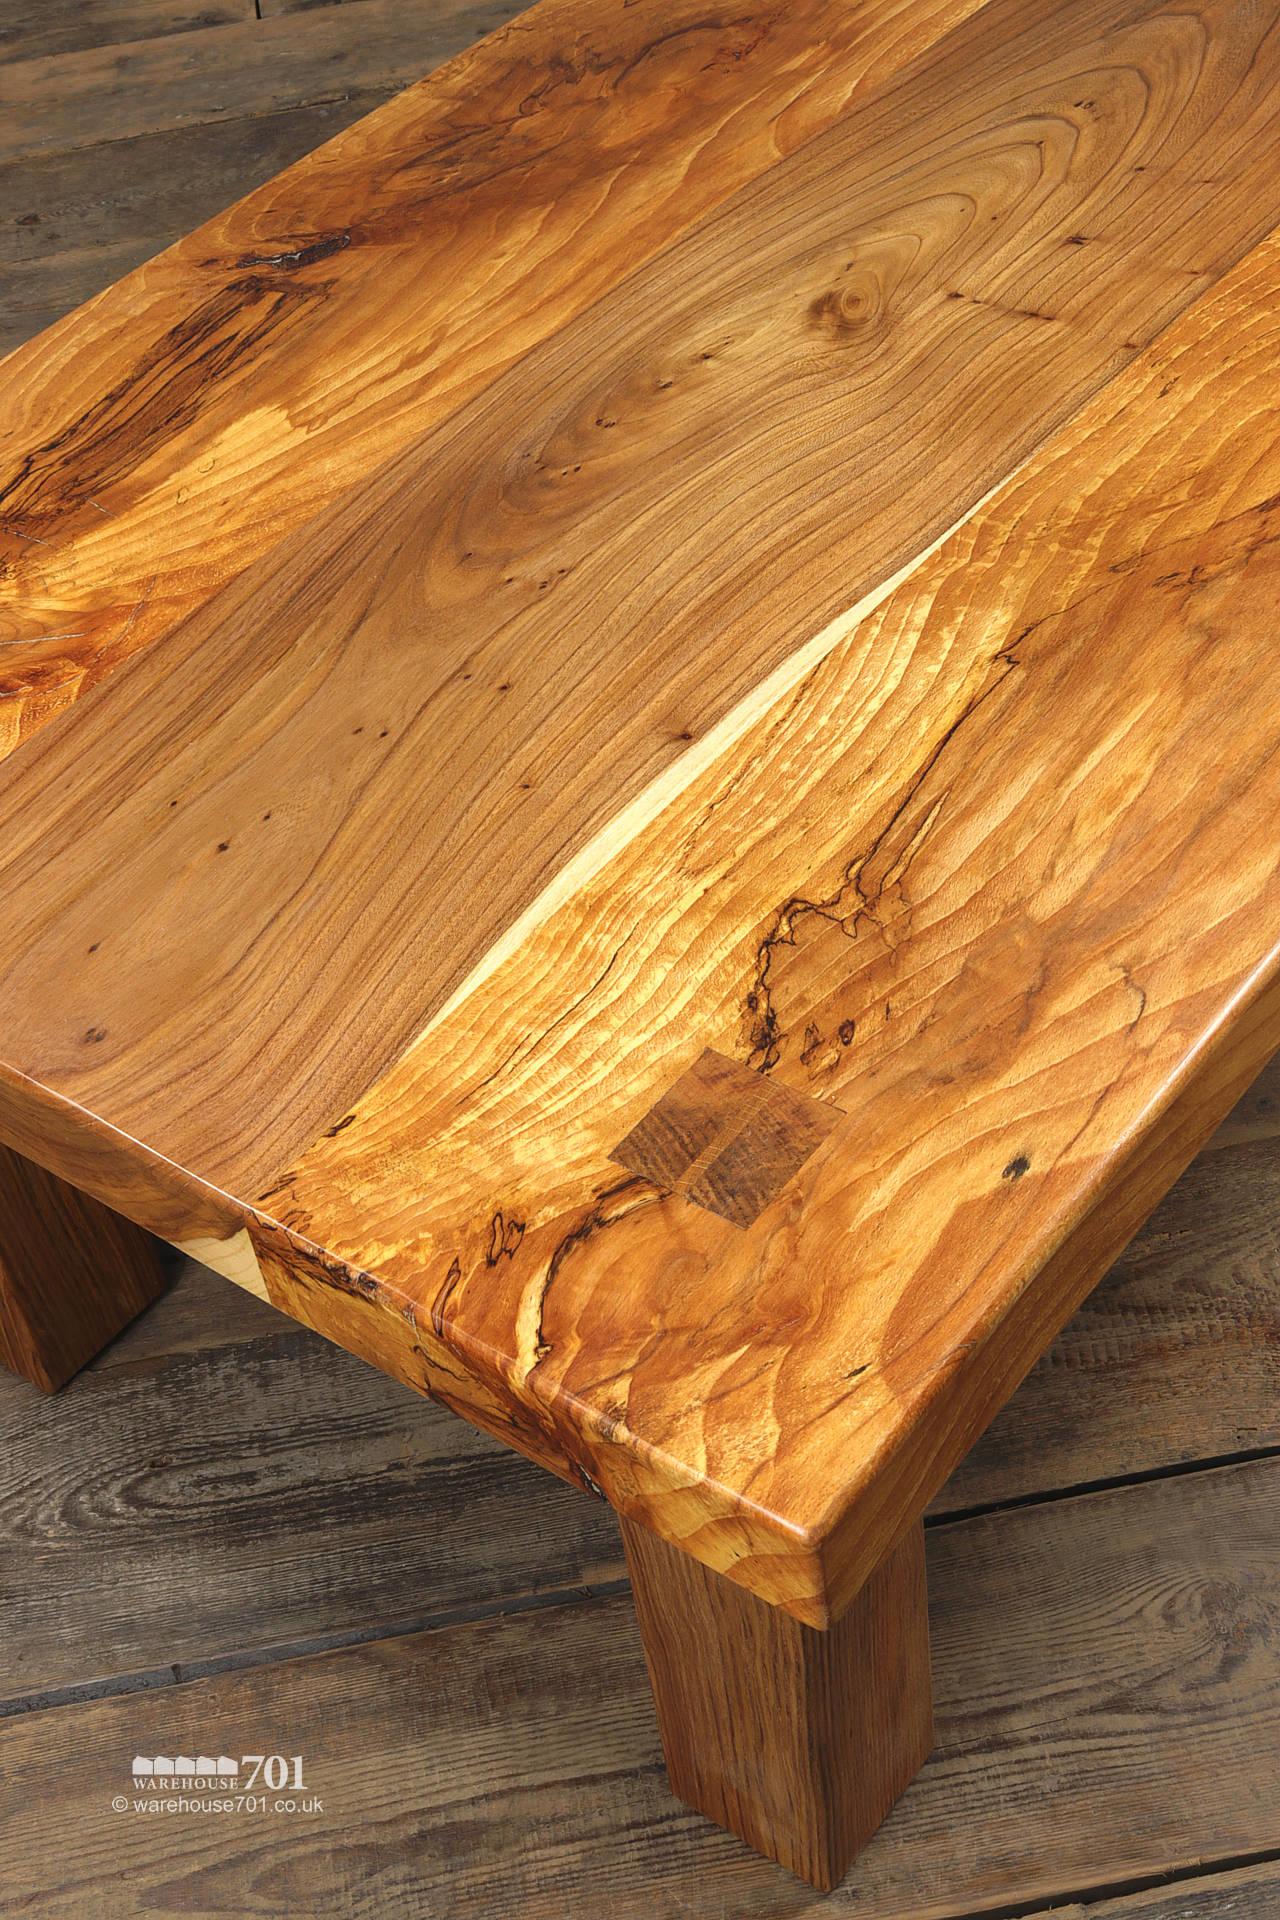 Simply the Most Beautiful Little Coffee Table Ever #1